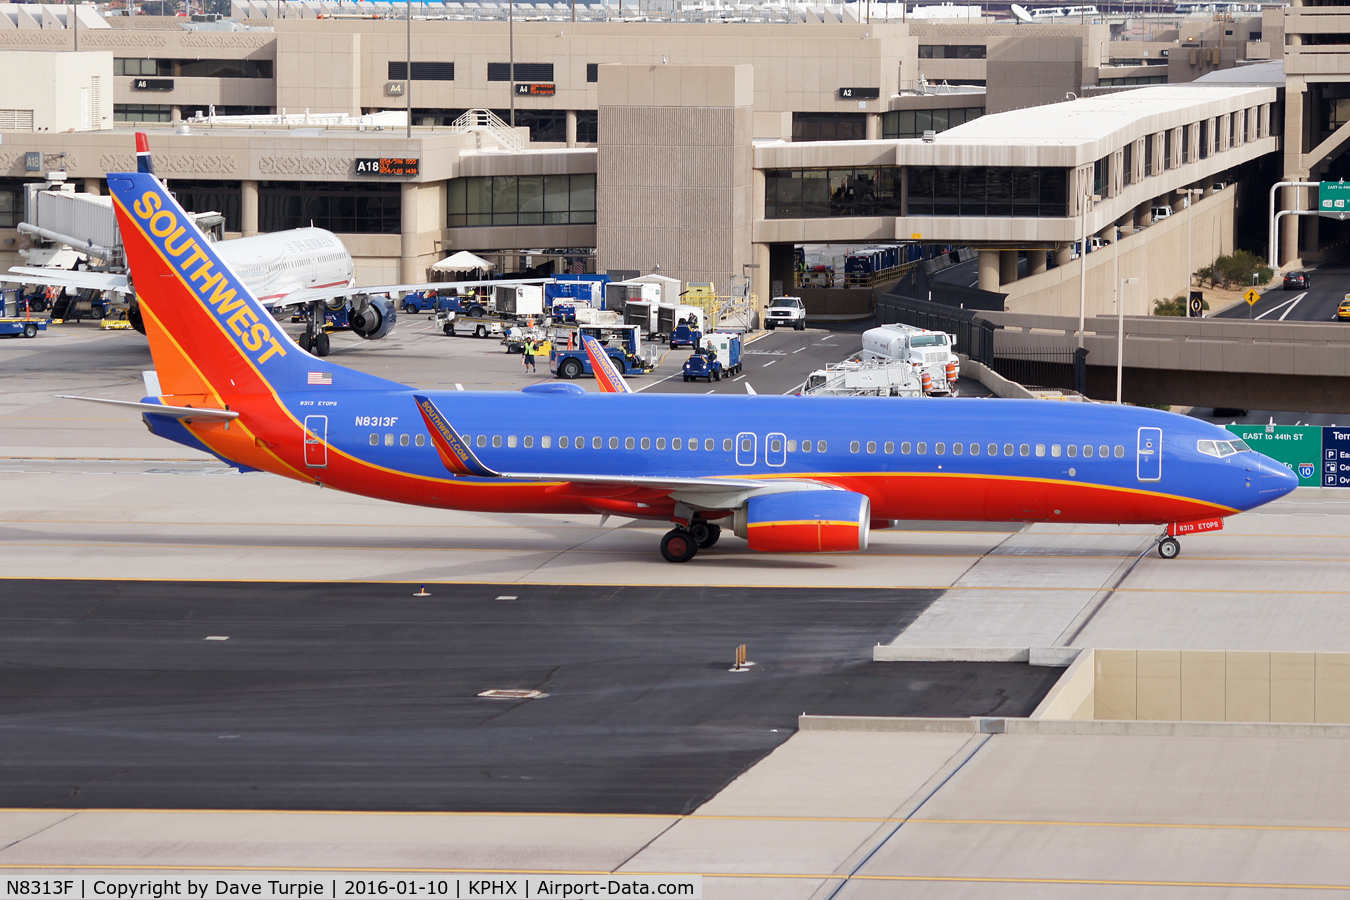 N8313F, 2012 Boeing 737-8H4 C/N 38810, Np comment.